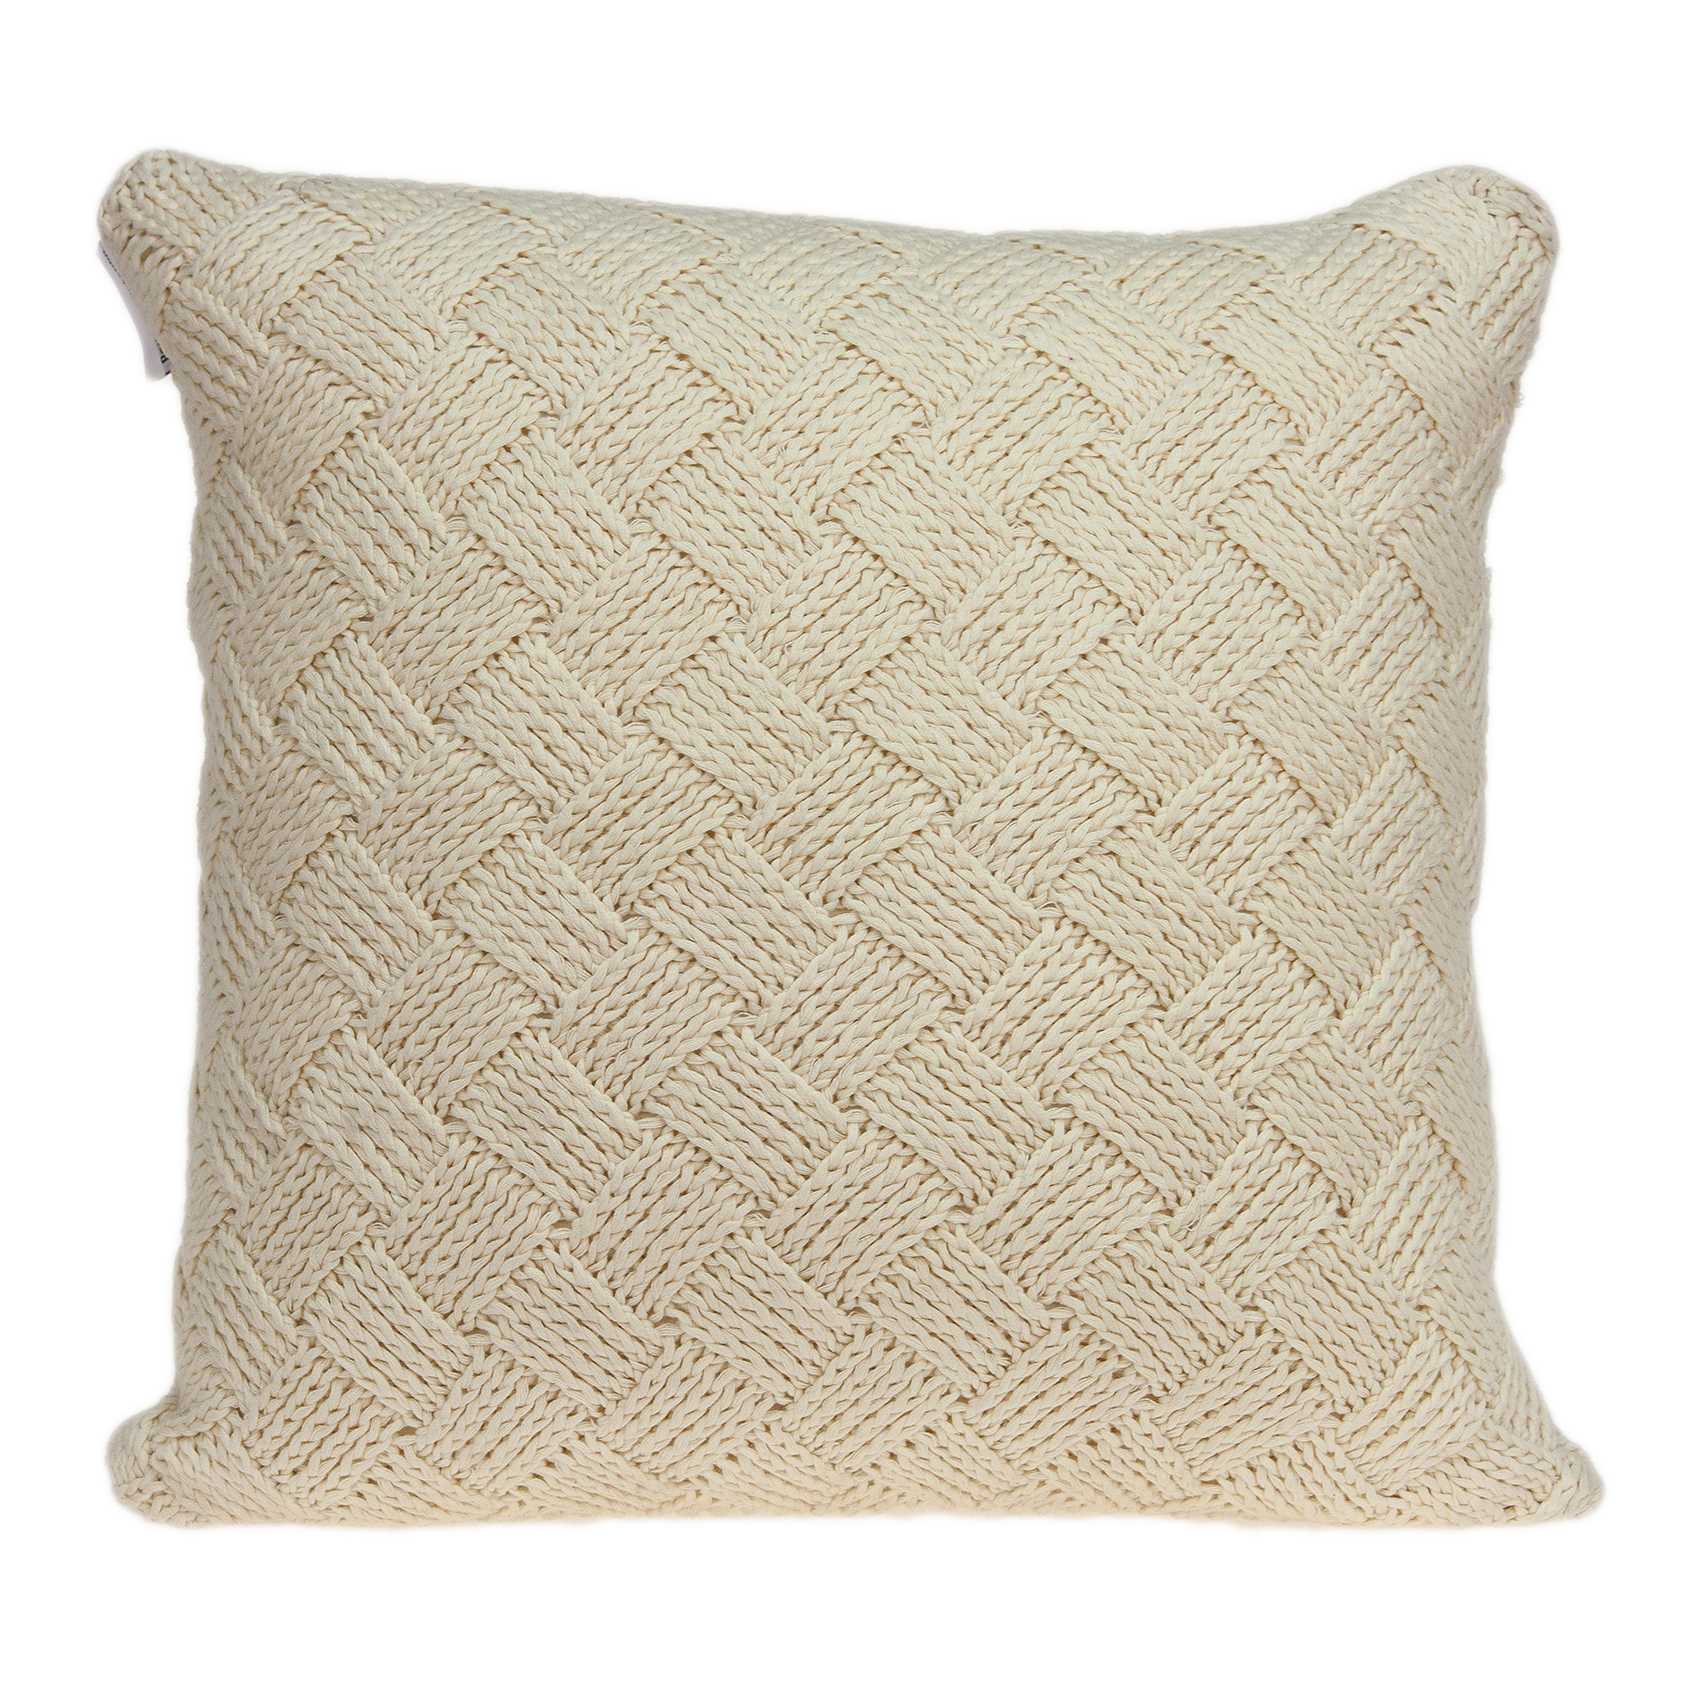 20" x 0.5" x 20" Beautiful Transitional Beige Accent Pillow Cover